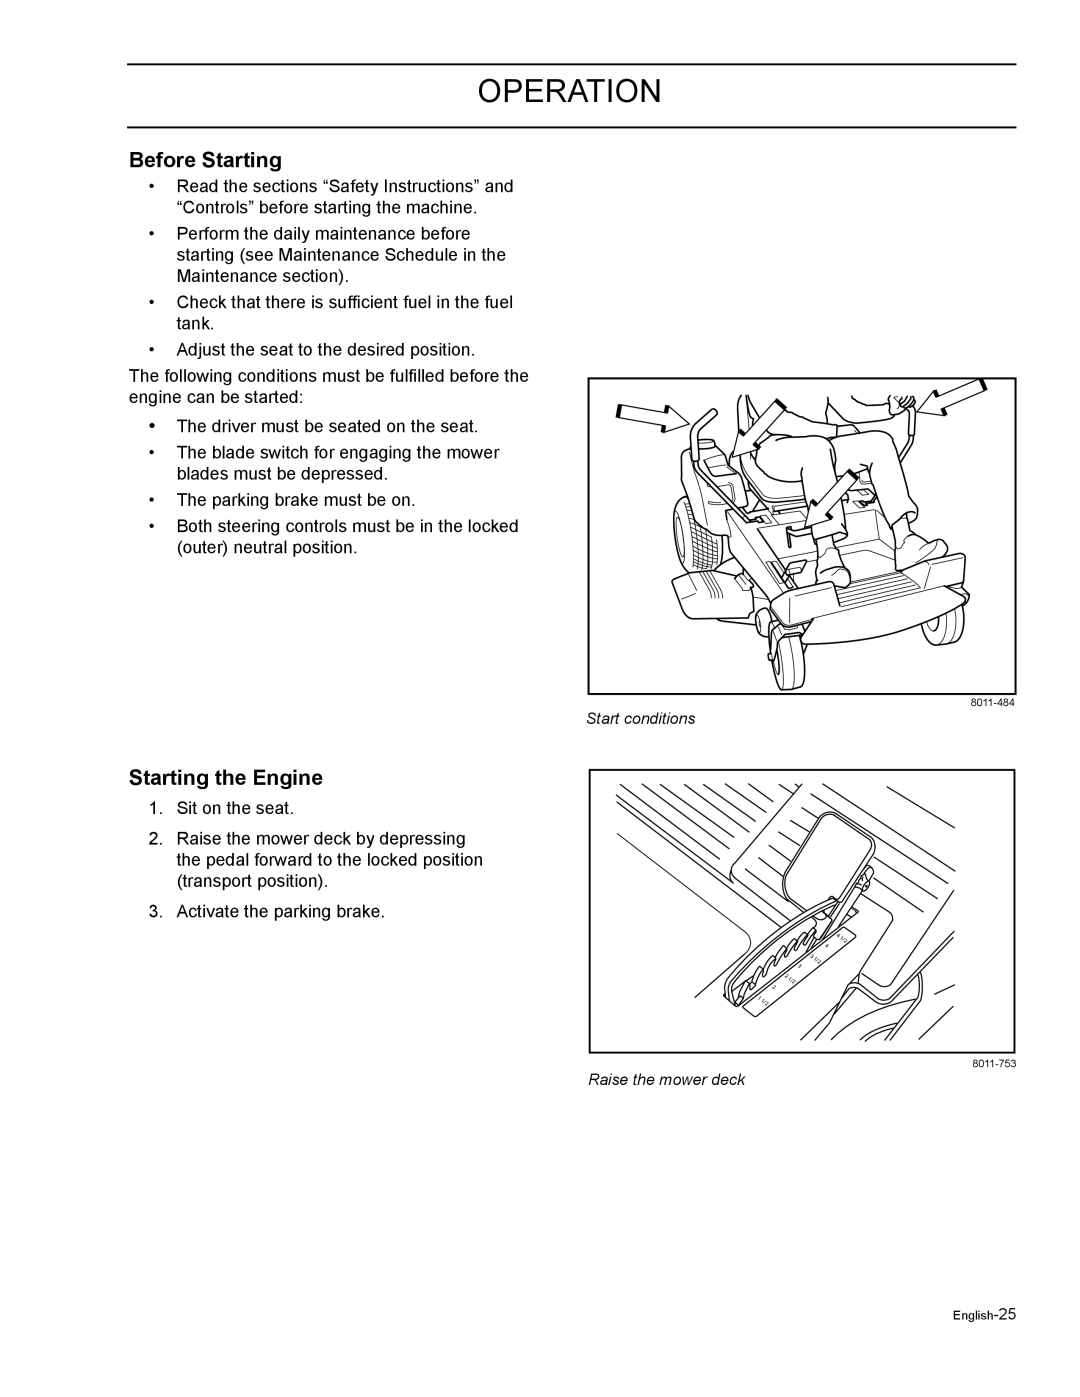 HTC Z4220BF, Z5426BF, Z4824BF, Z4619BF, Z4219BF manual Before Starting, Starting the Engine, Operation 